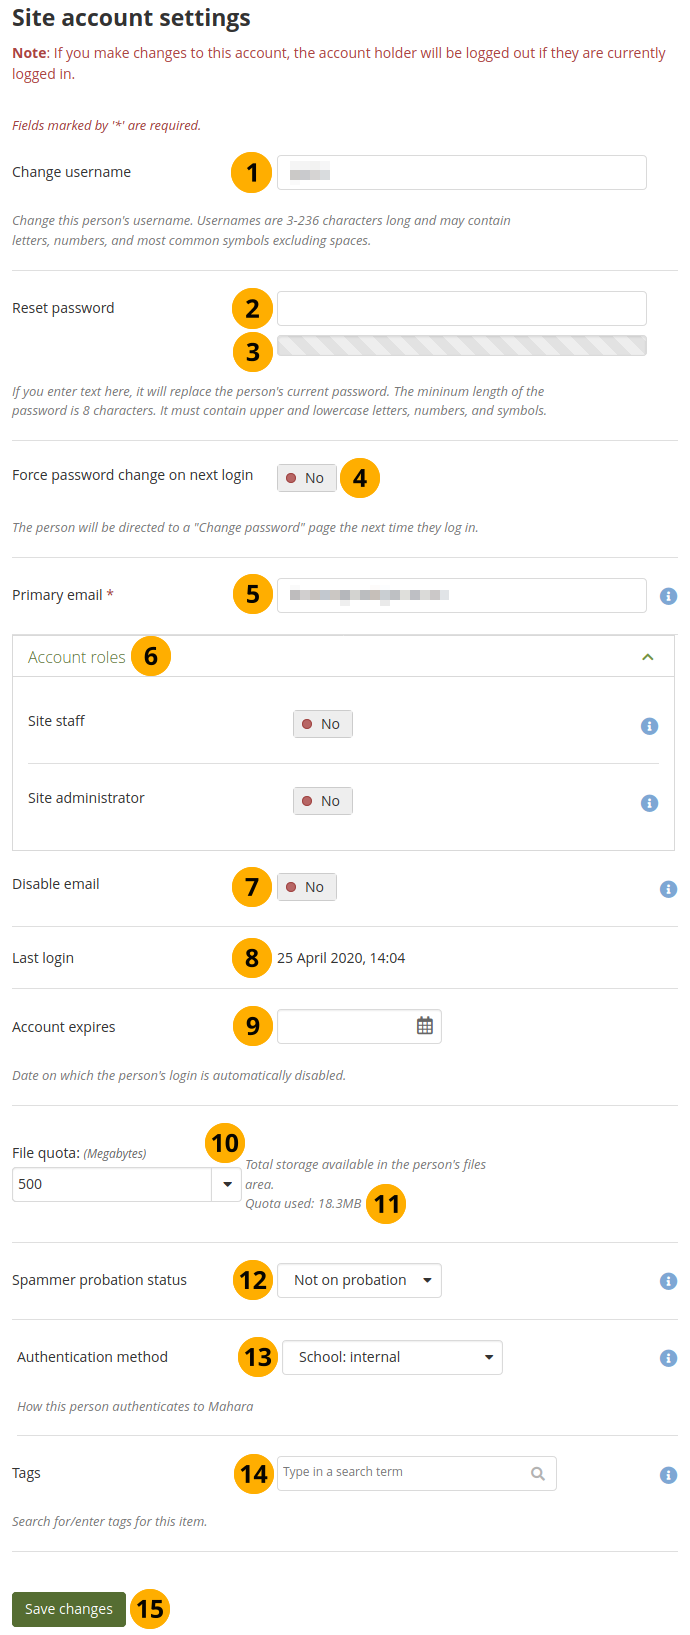 Site account settings of a person